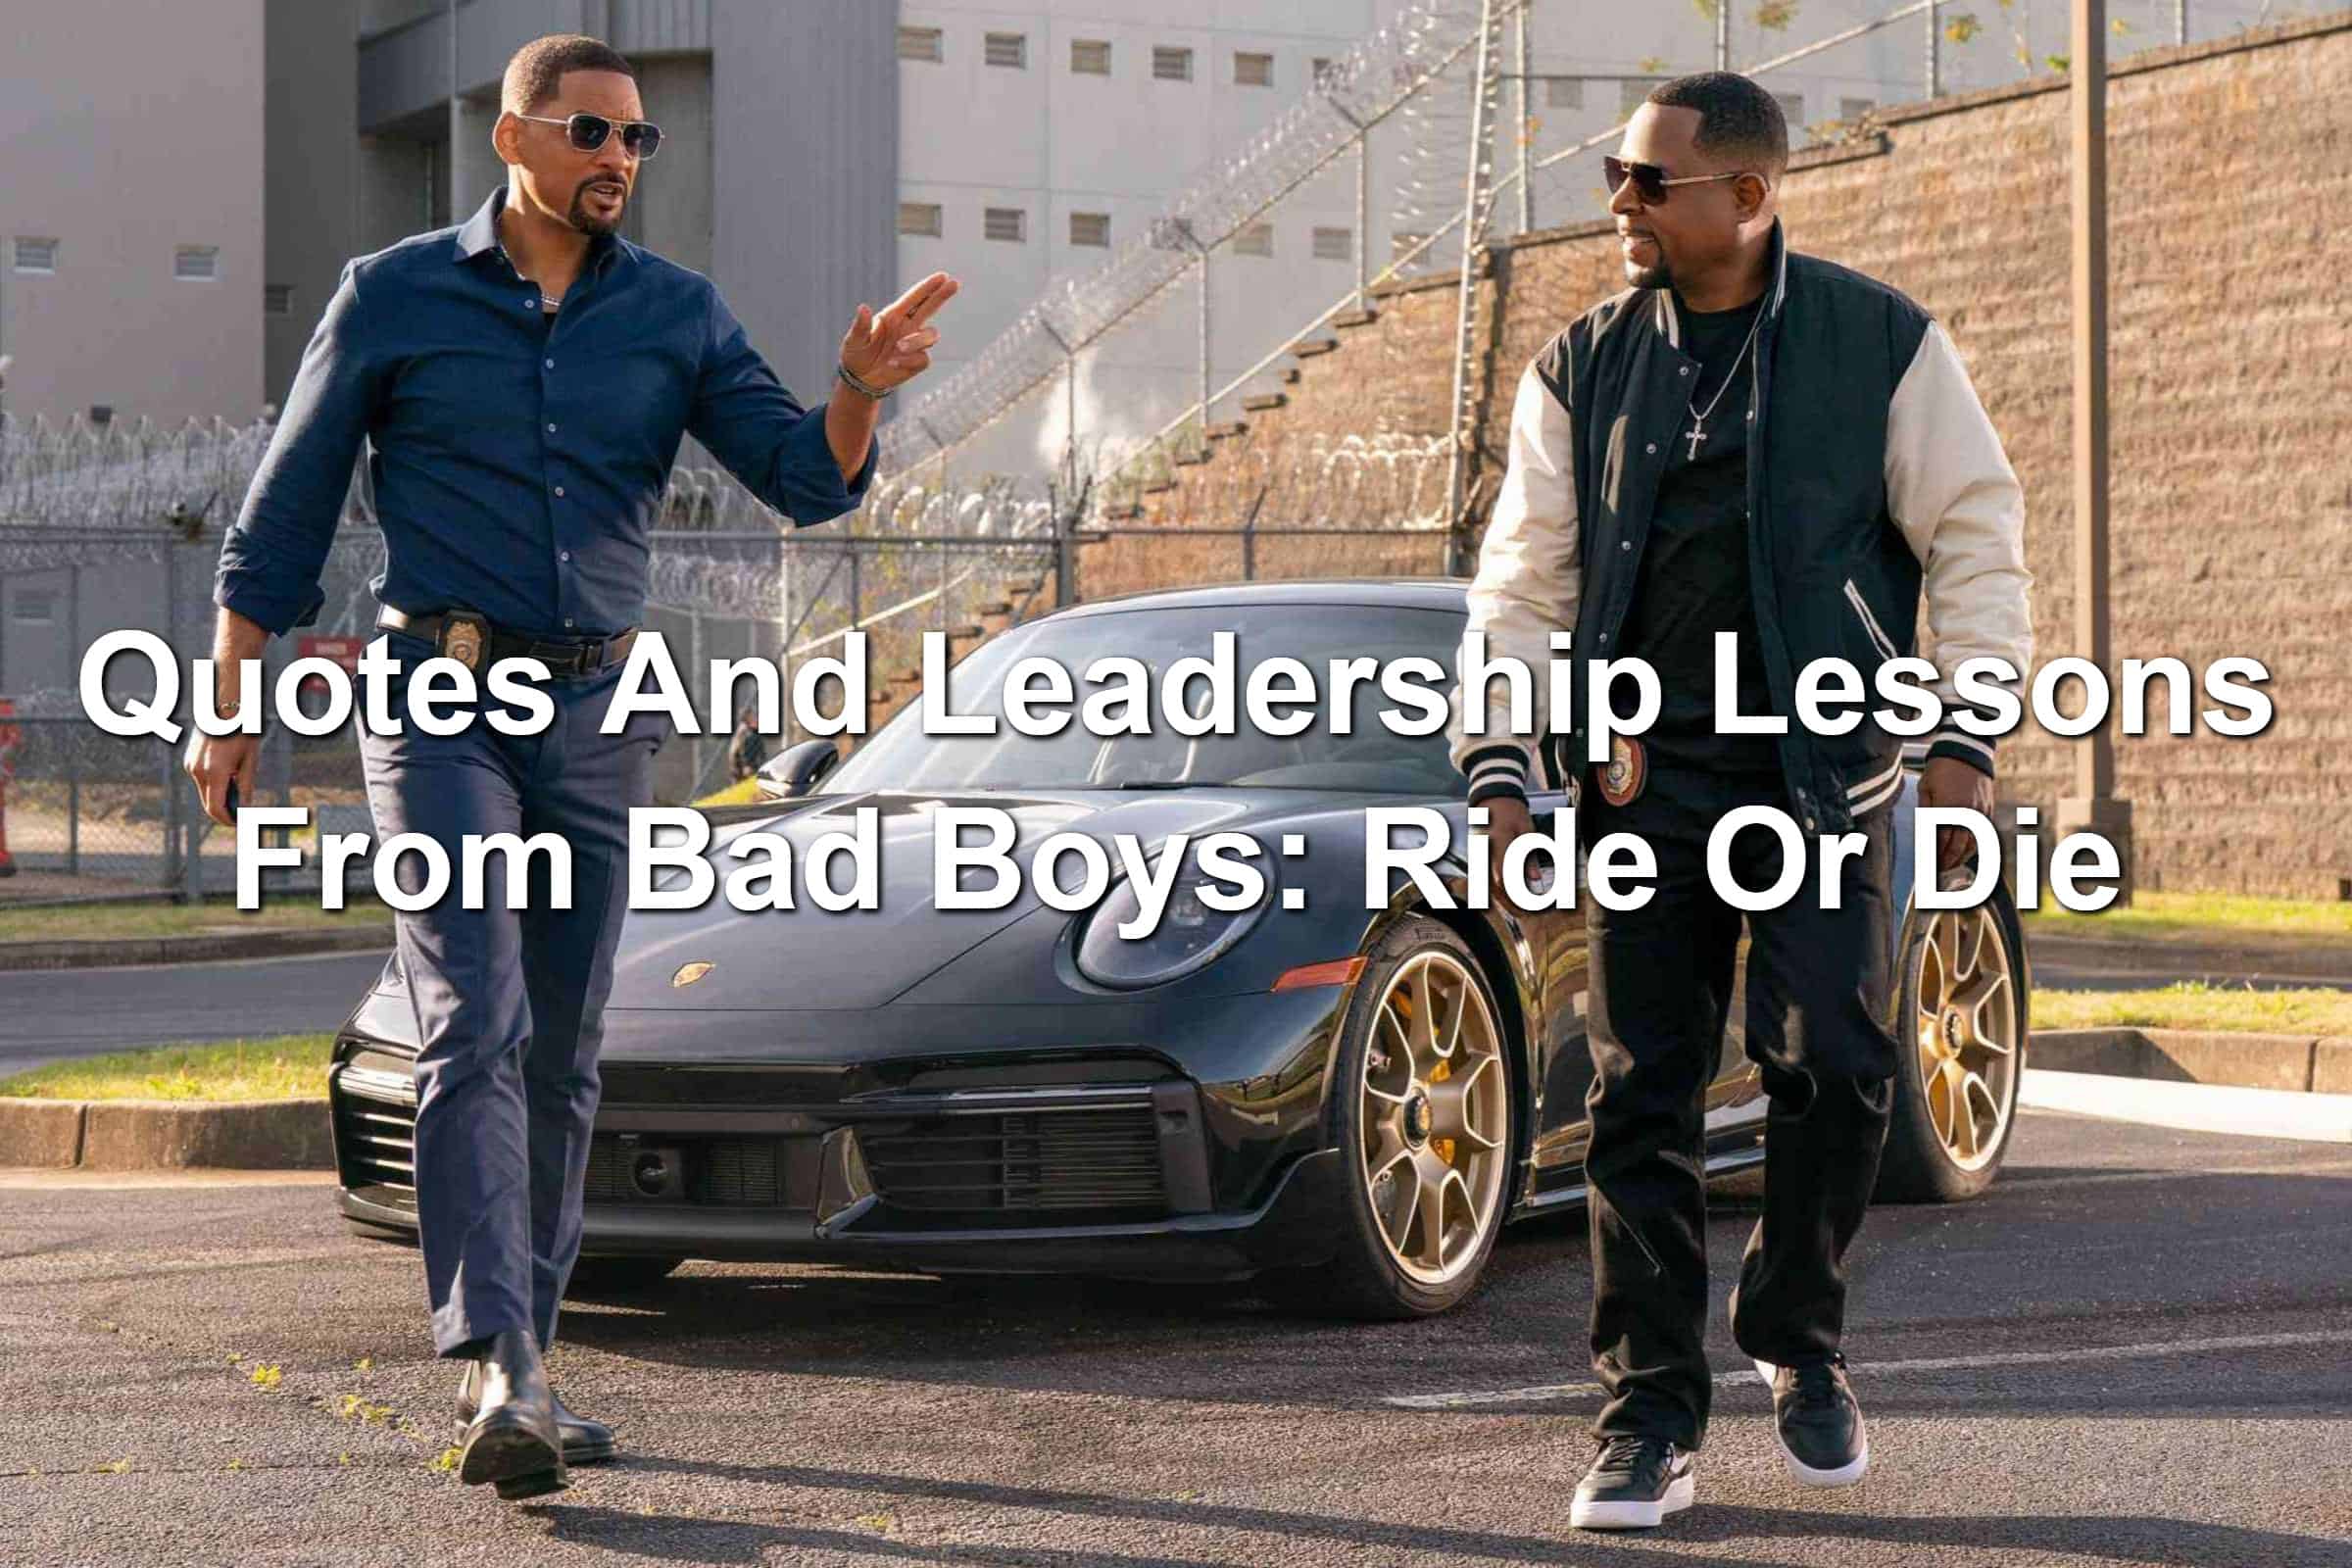 Two men standing in front of a fancy sports car. Scene from Bad Boys: Ride Or Die. Martin Lawrence and Will Smith